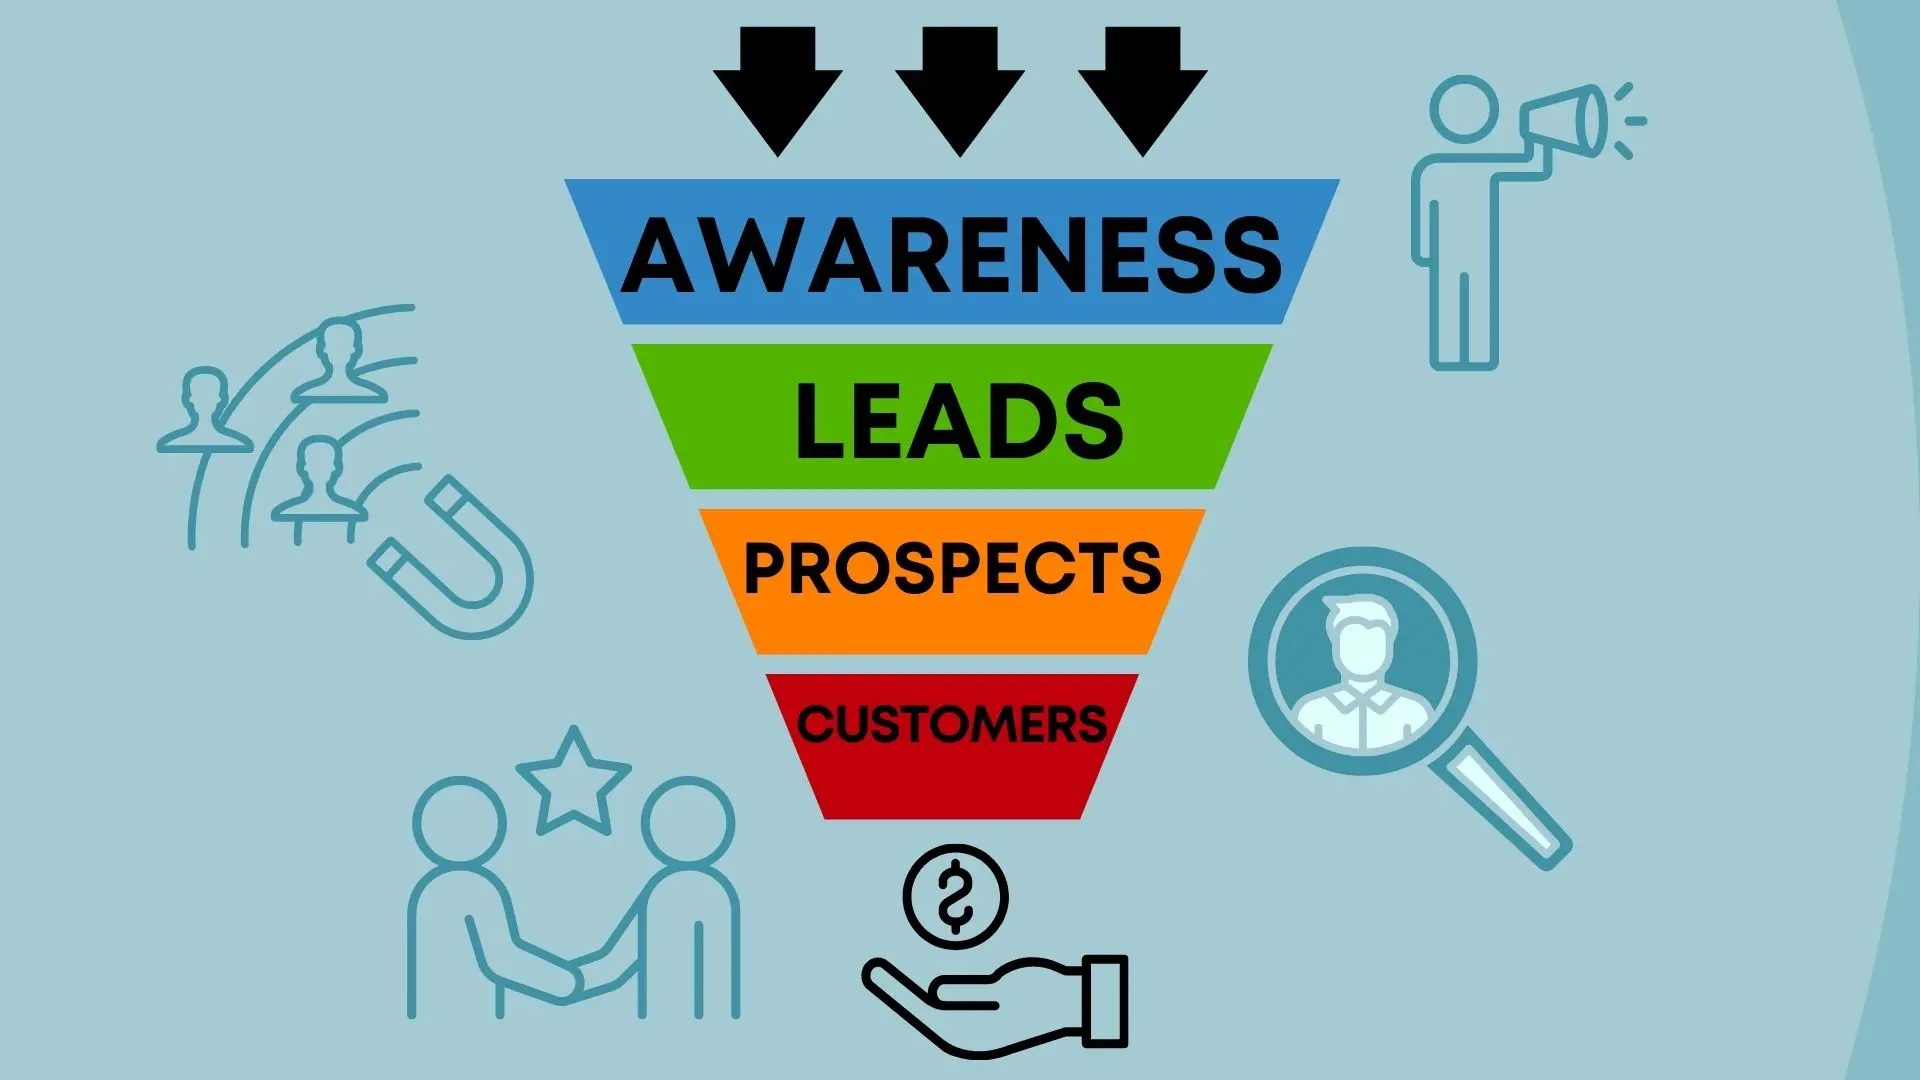 Lead Generation is the Key step!